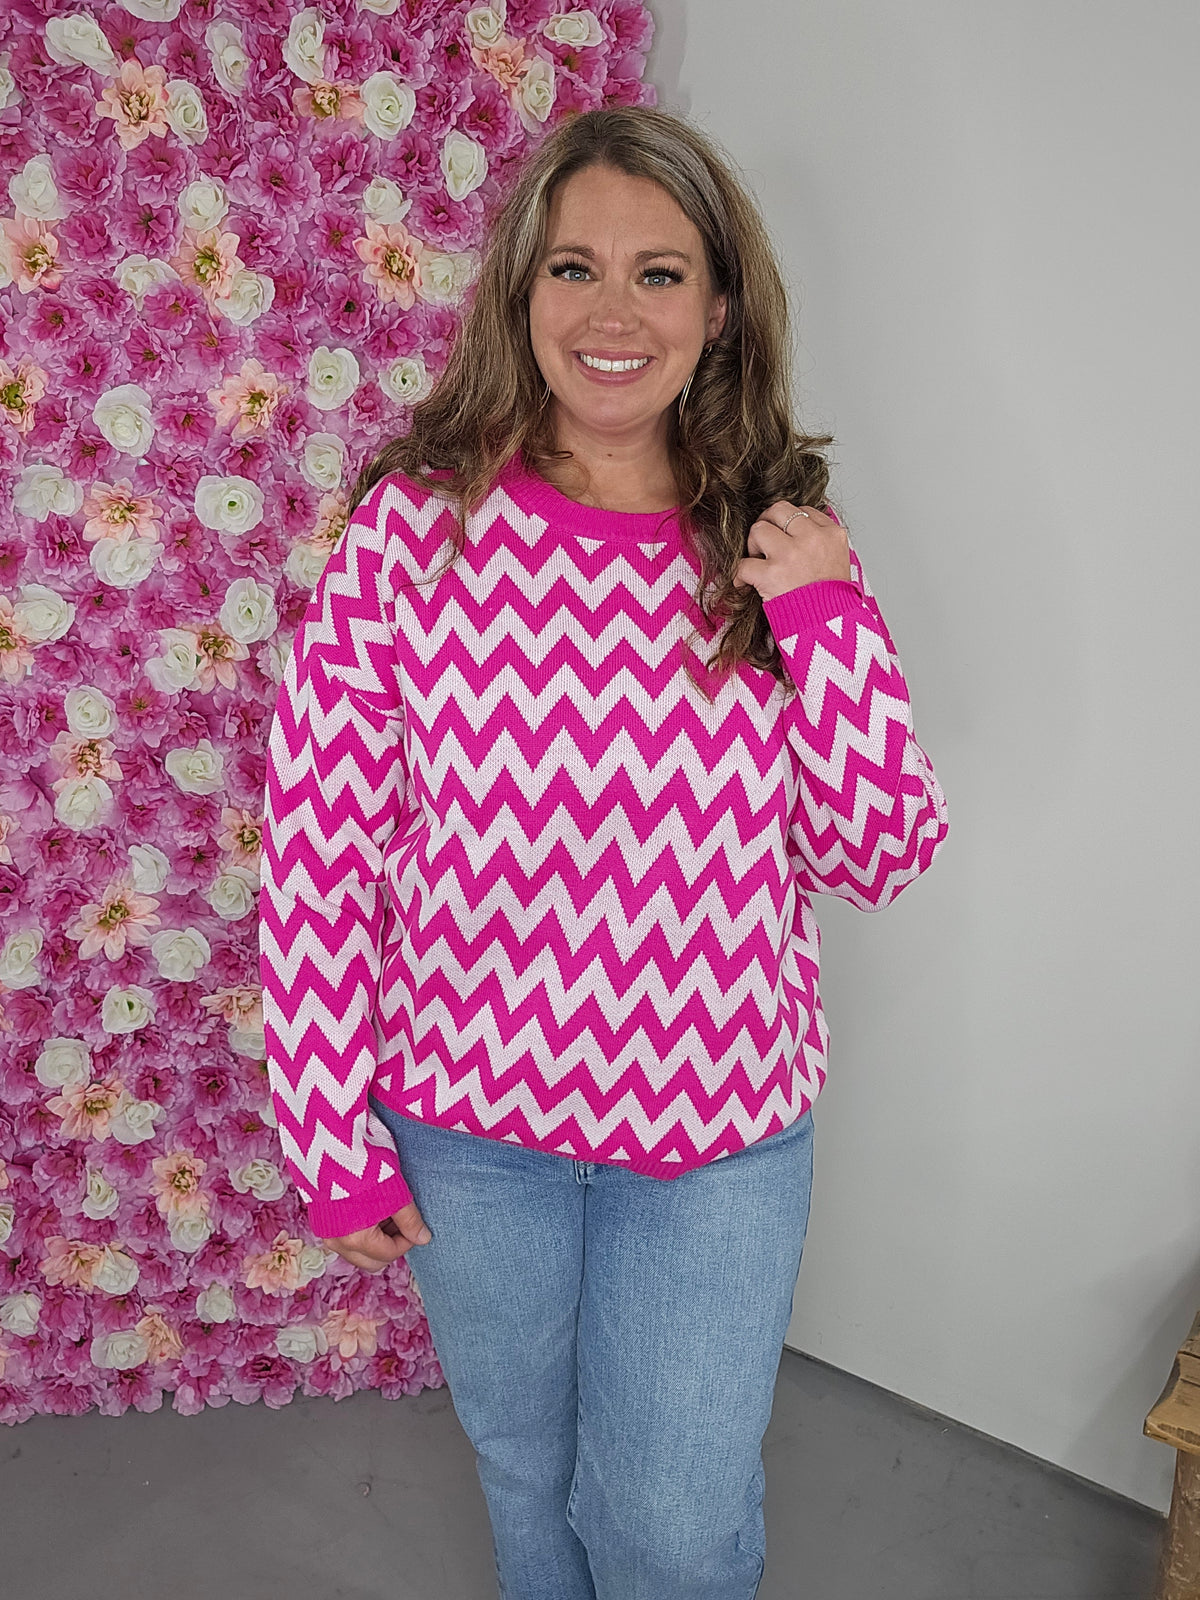 DAILY DEAL FINAL SALE HOT PINK CHEVRON SWEATER